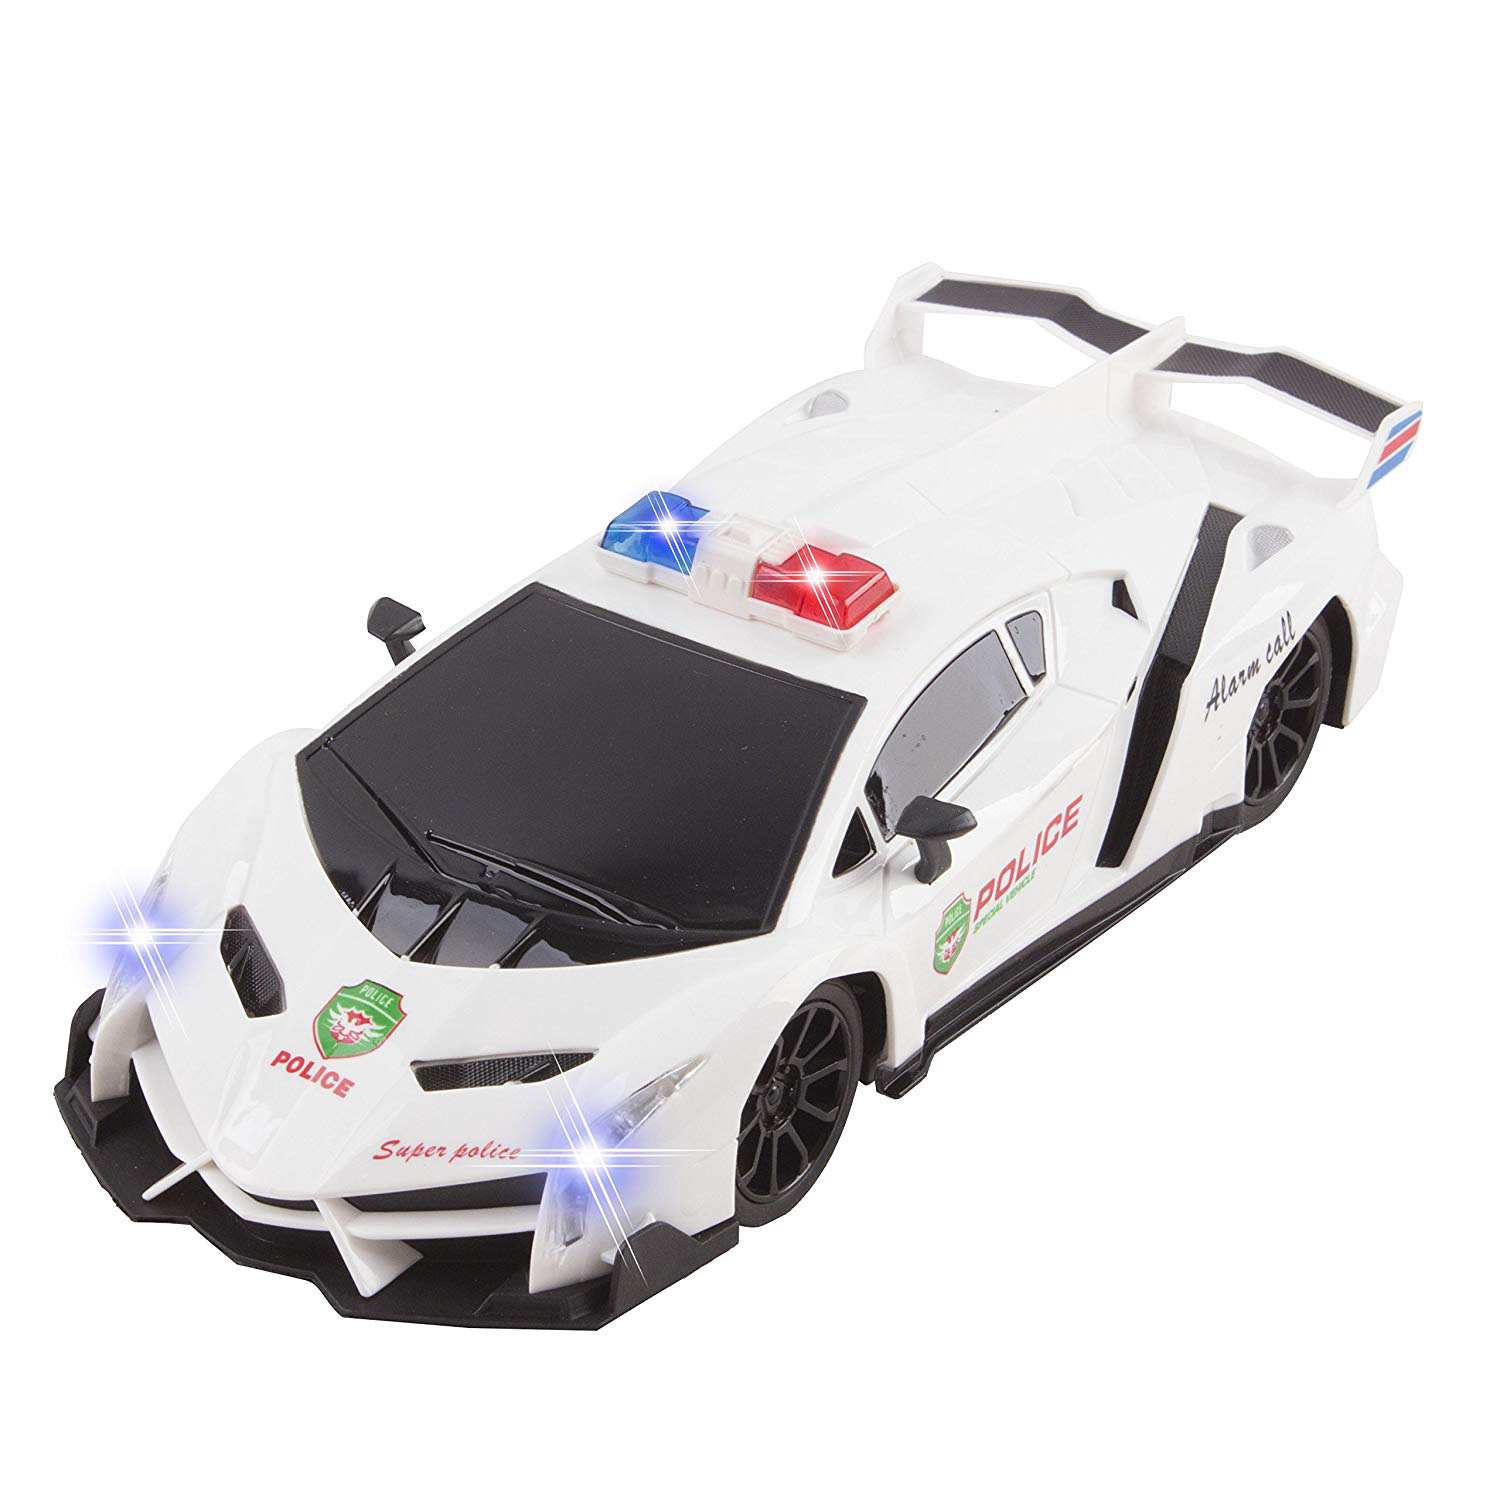 RC Police Car Super Exotic 12" Kids Remote Control Toy LED Headlights RD808 